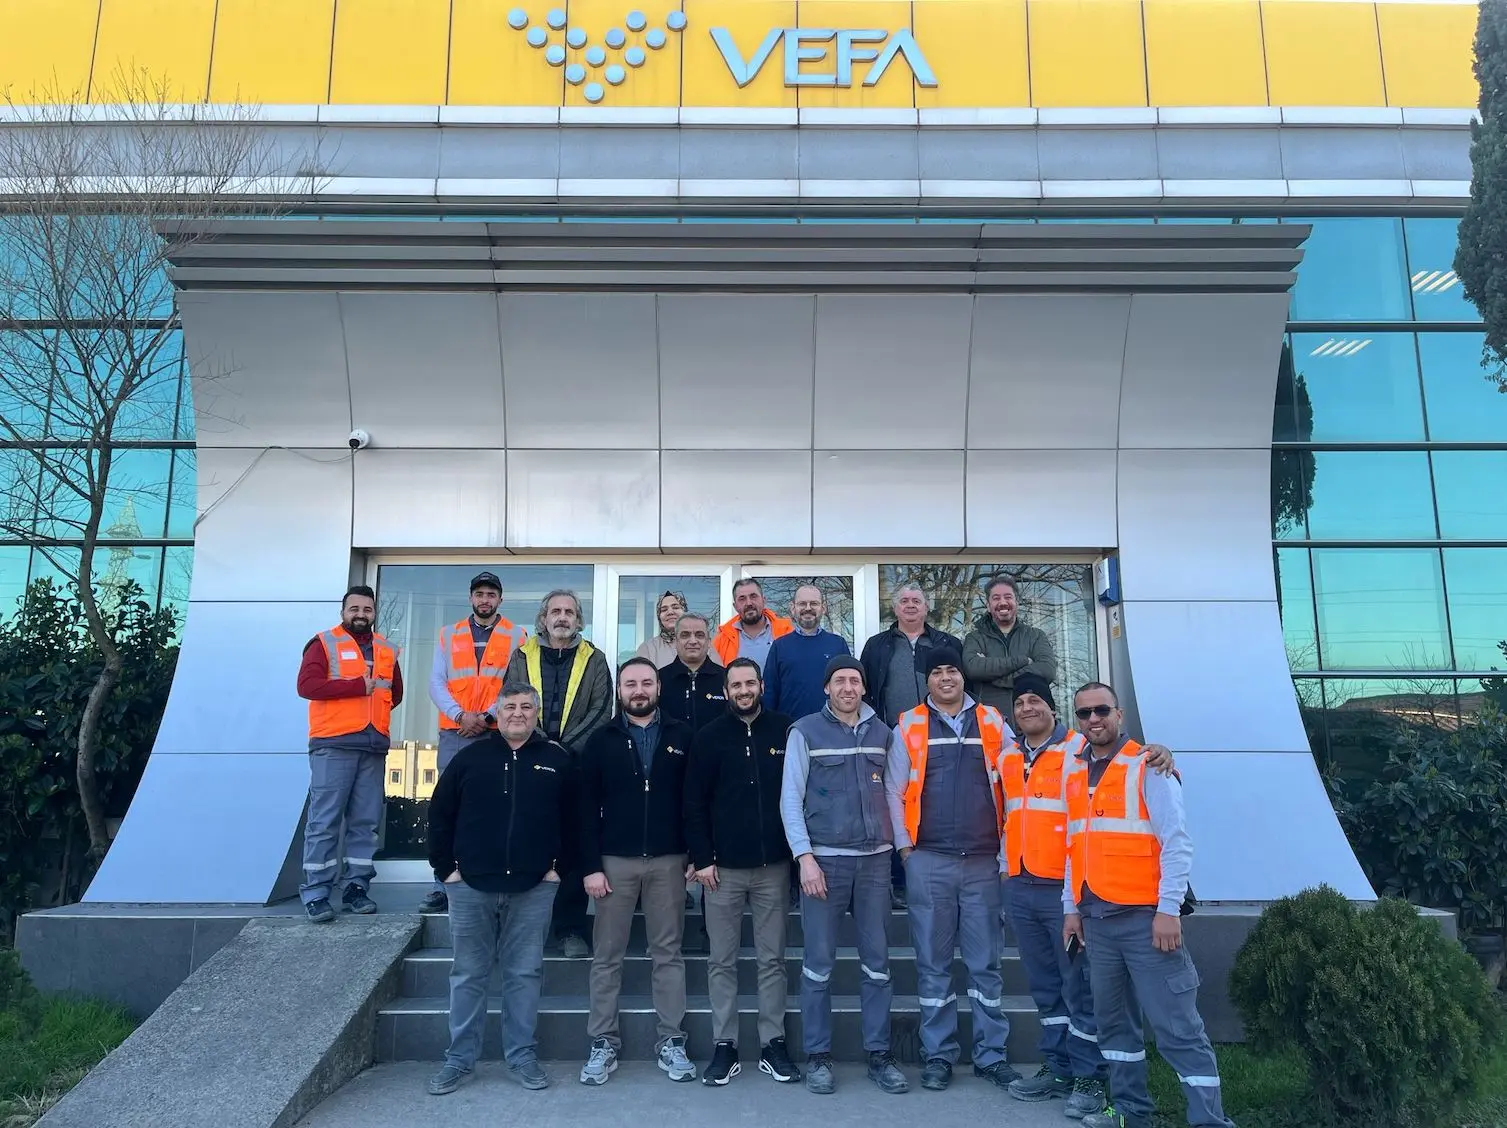 For the Mass Housing Project, Vekon Conducted Hands-on Training at Their Factory.